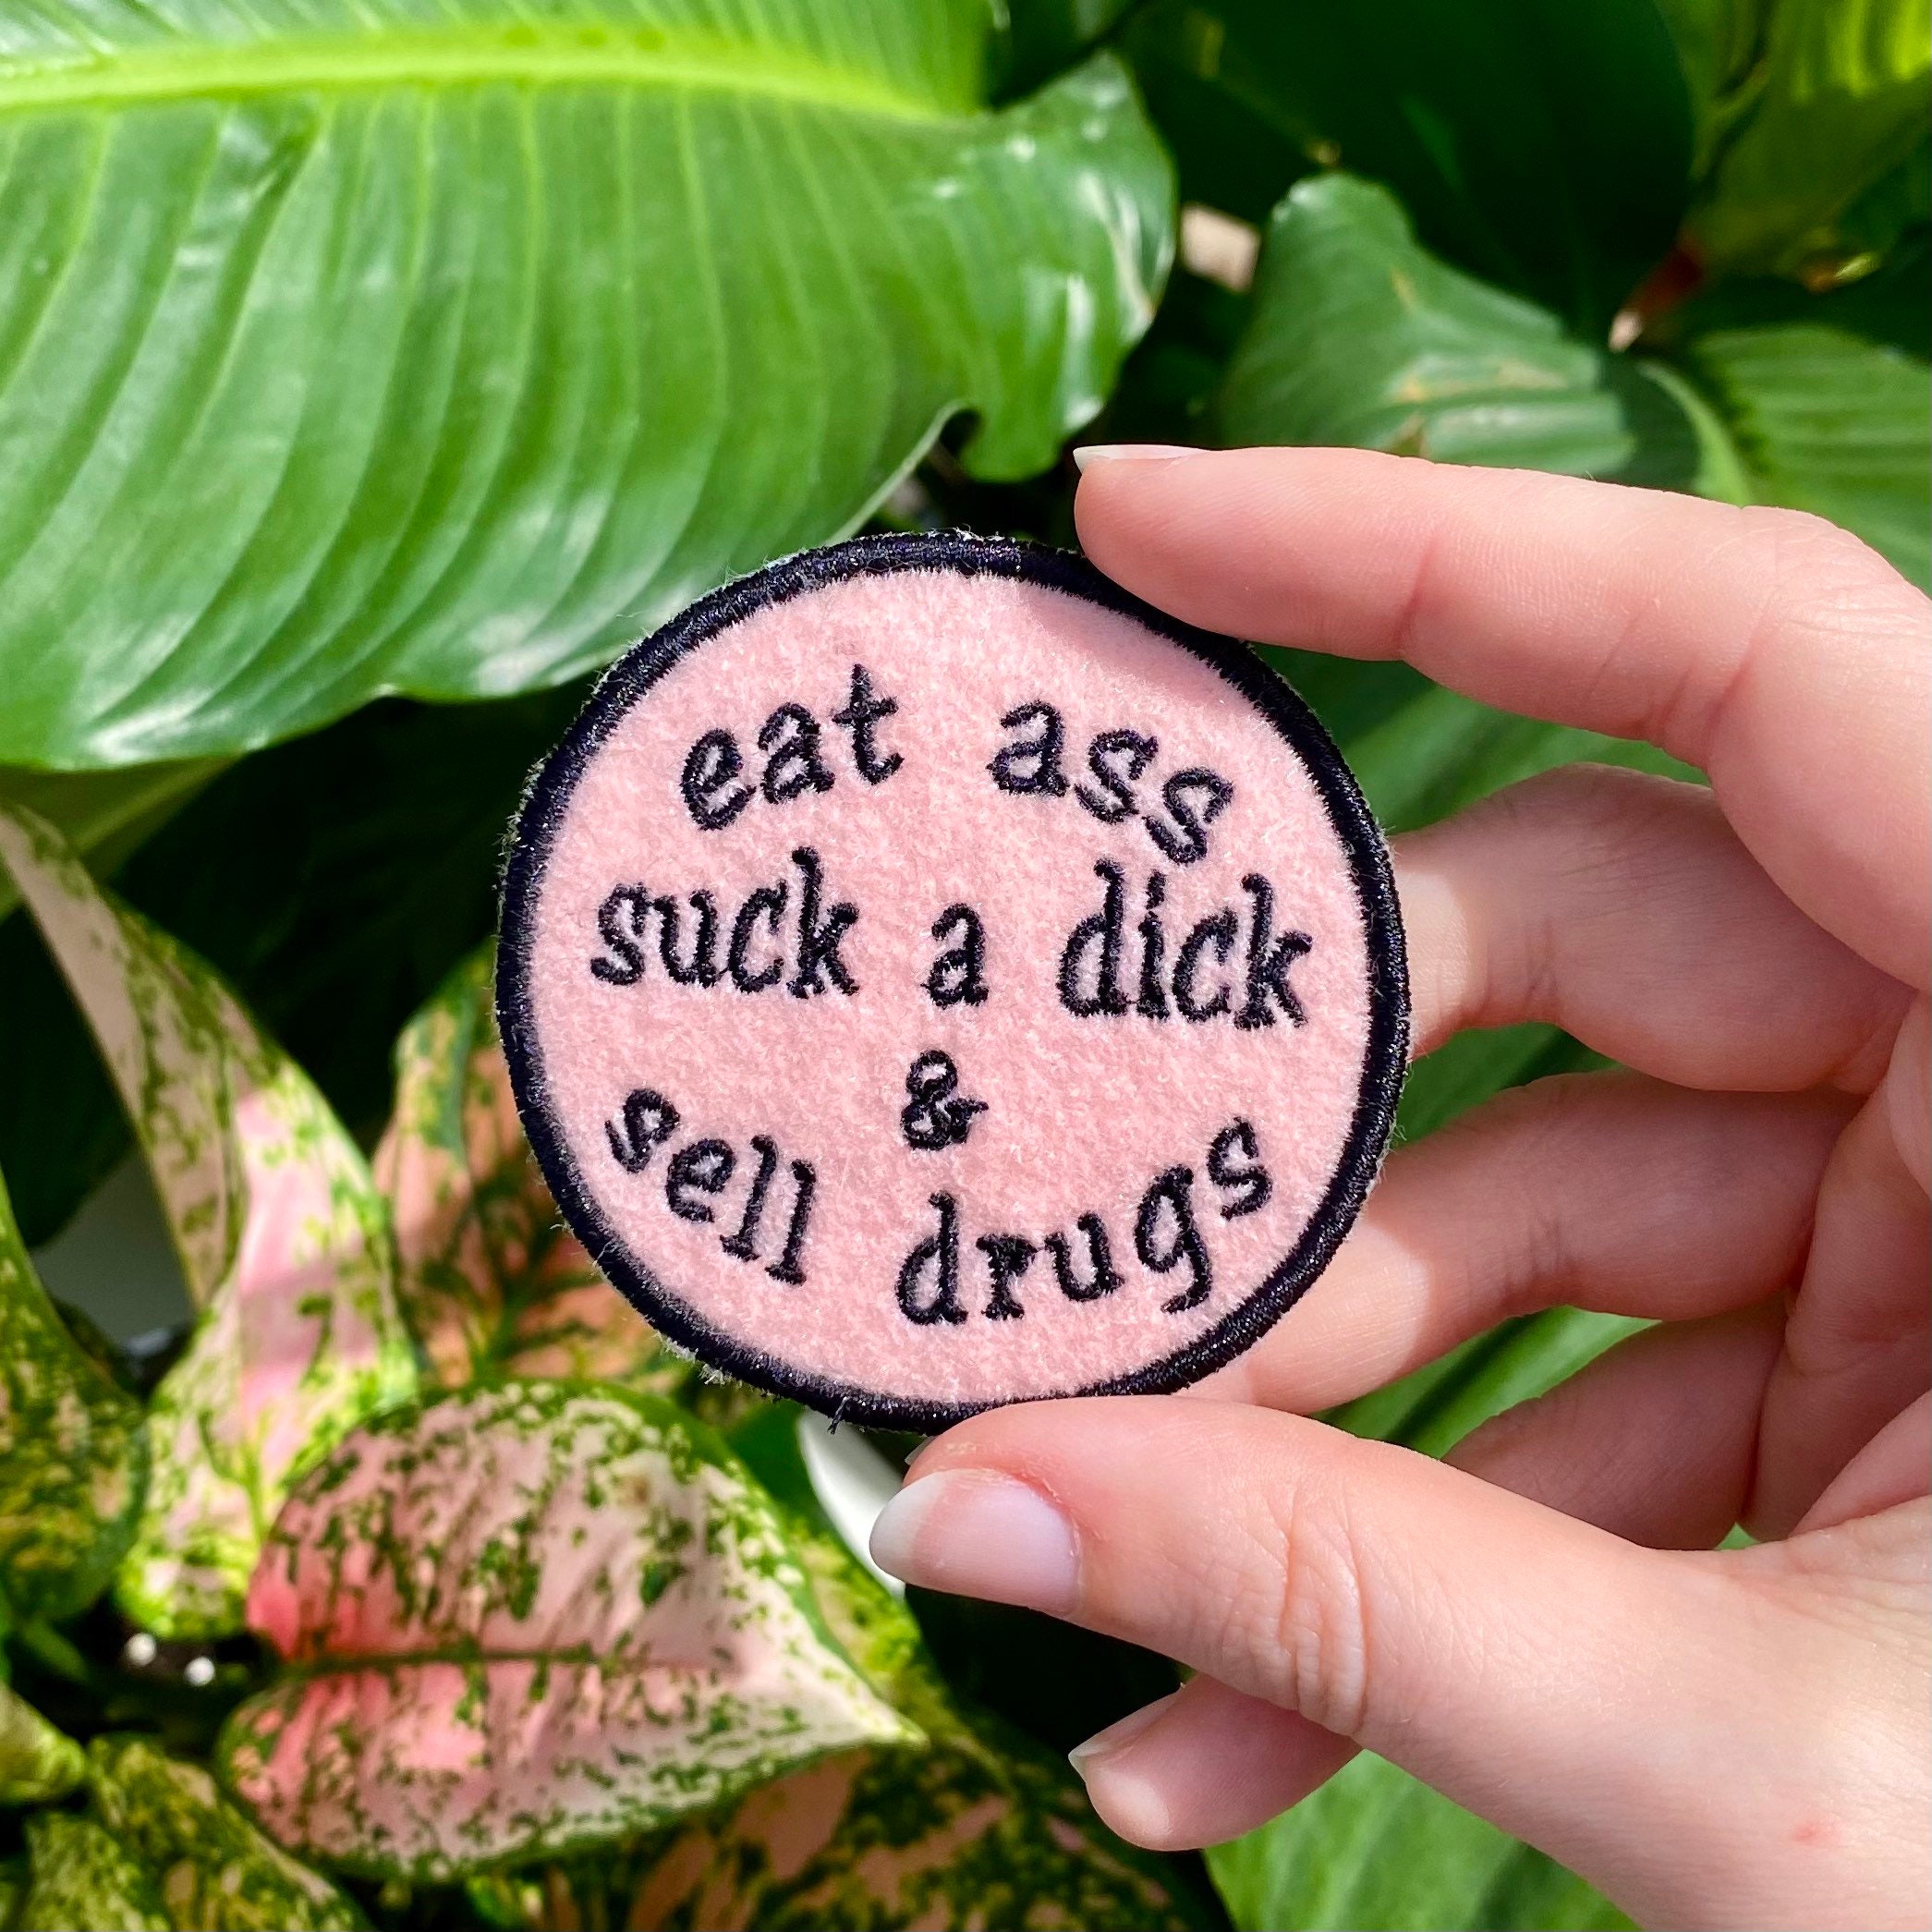 Eat ass suck dicks and sell drugs